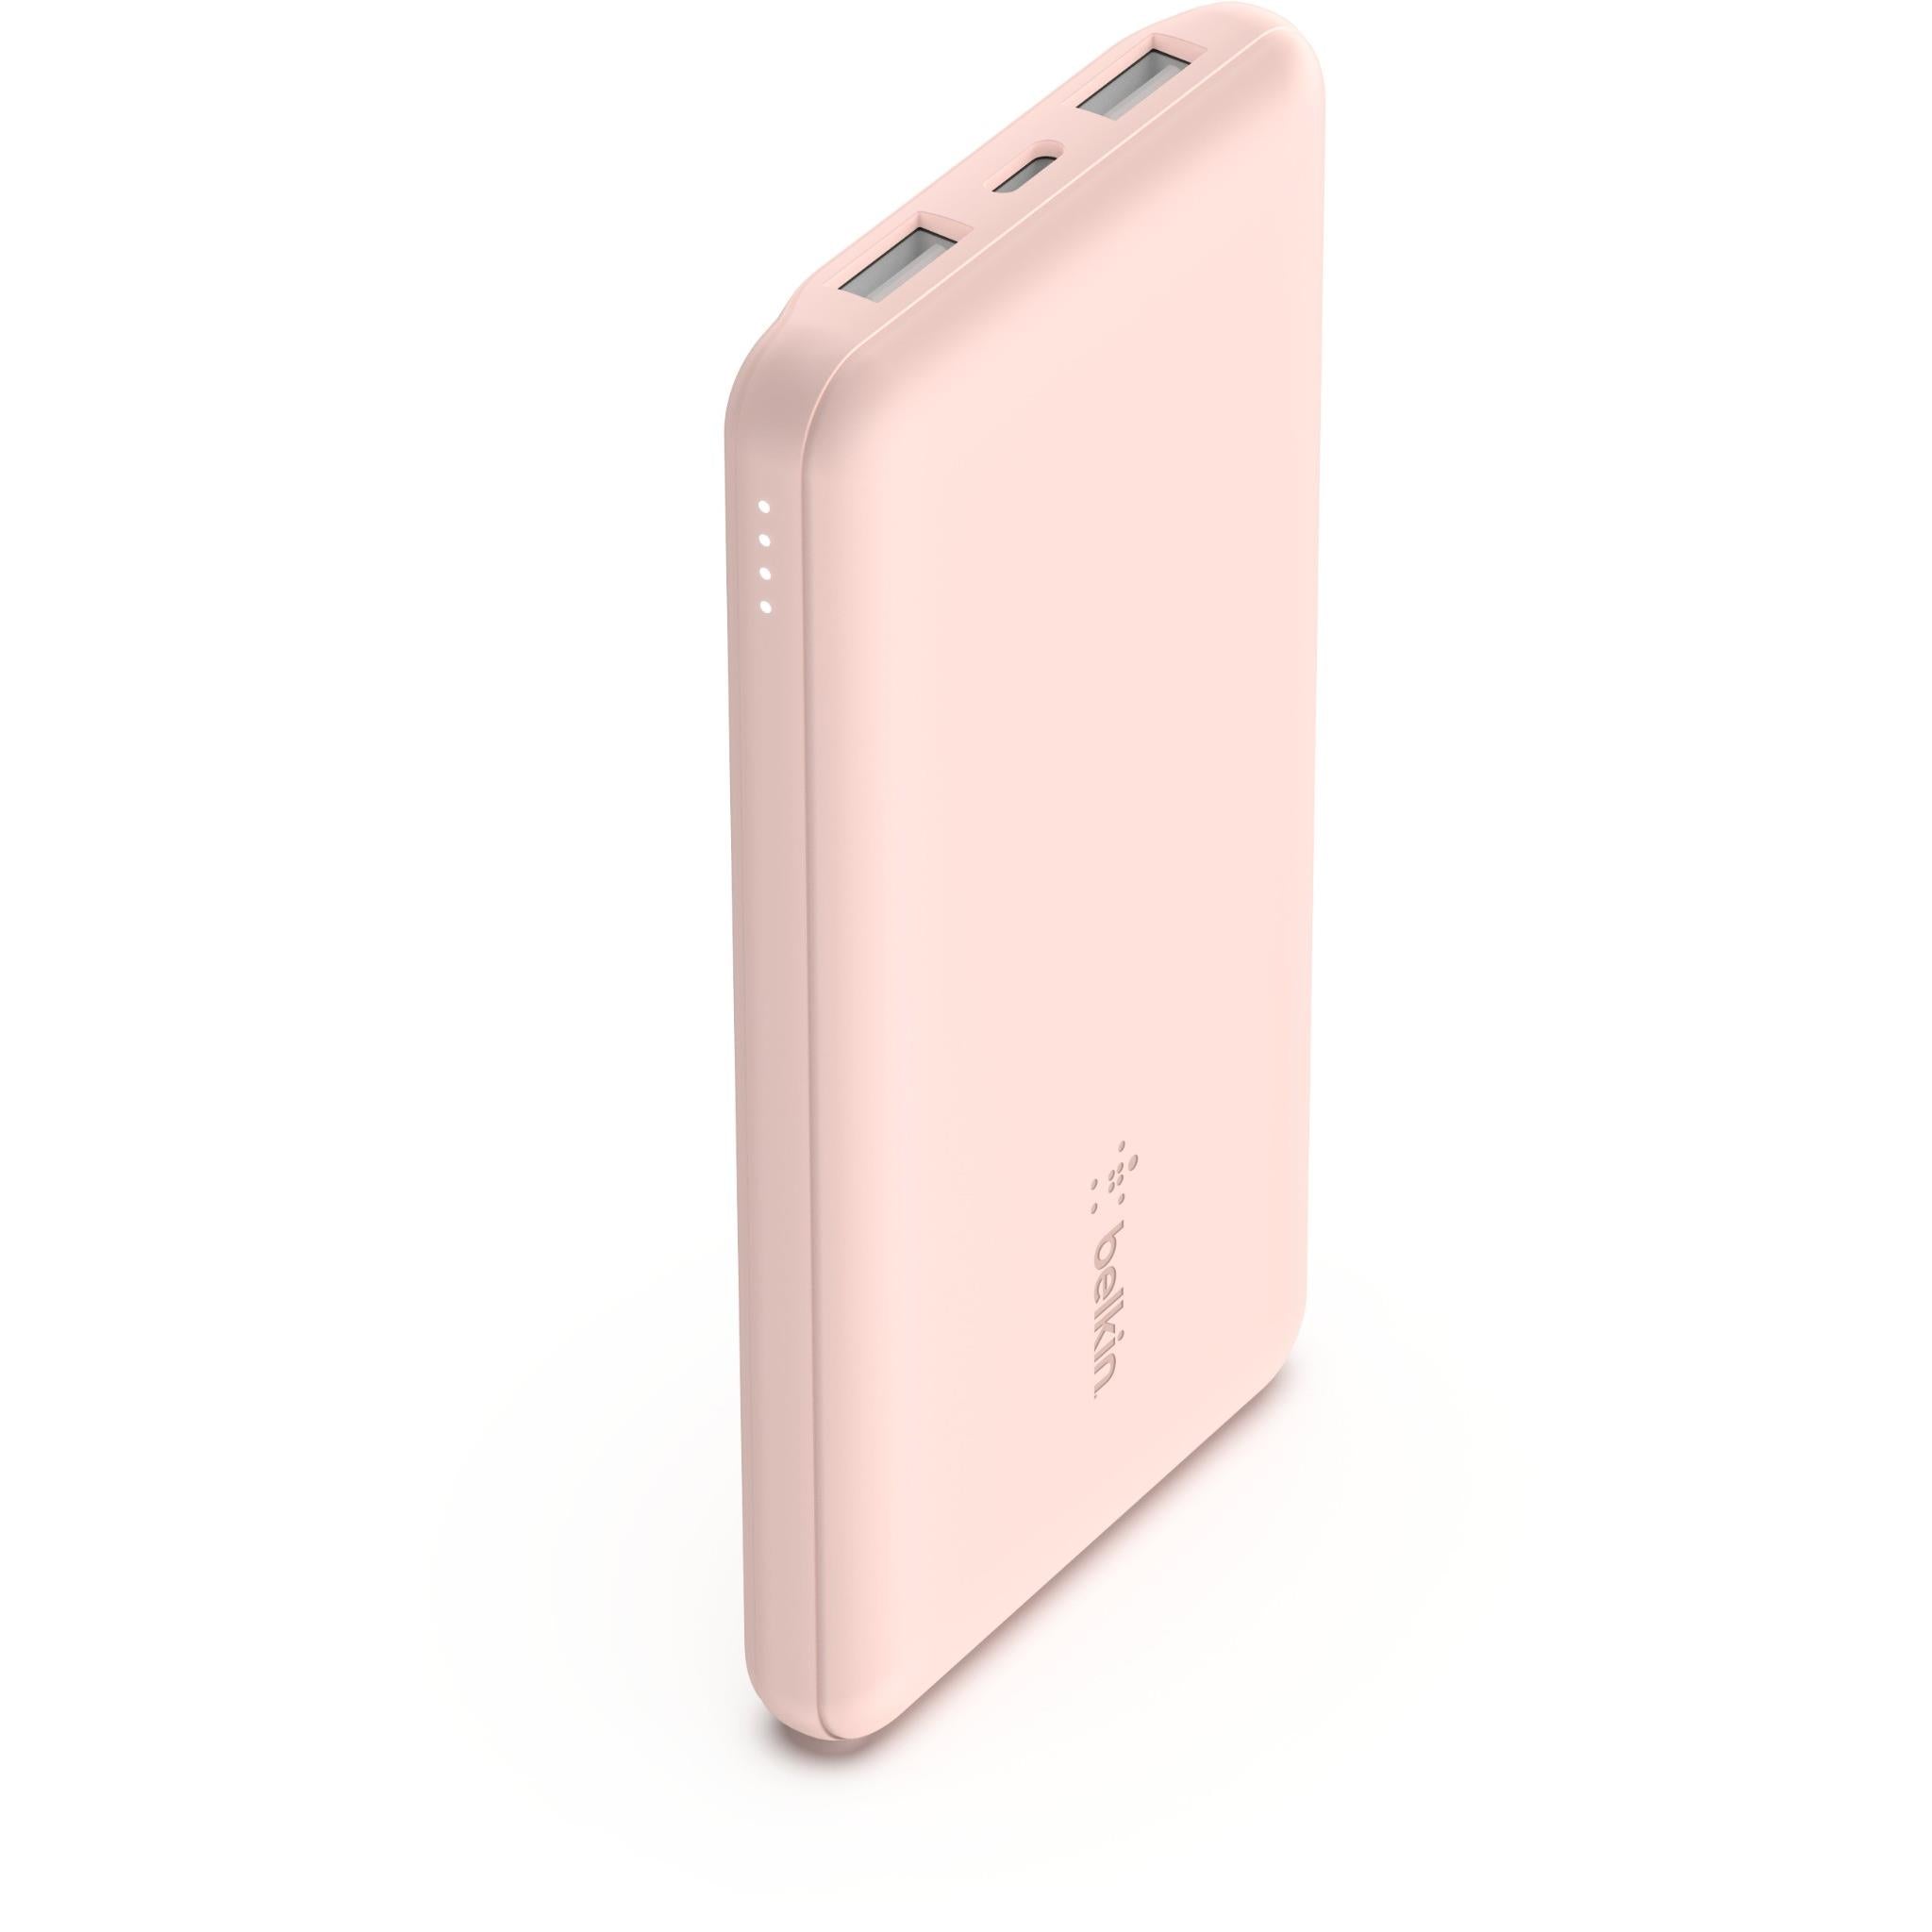 belkin boostup charge 10k 3 port power bank with cable (rose gold)